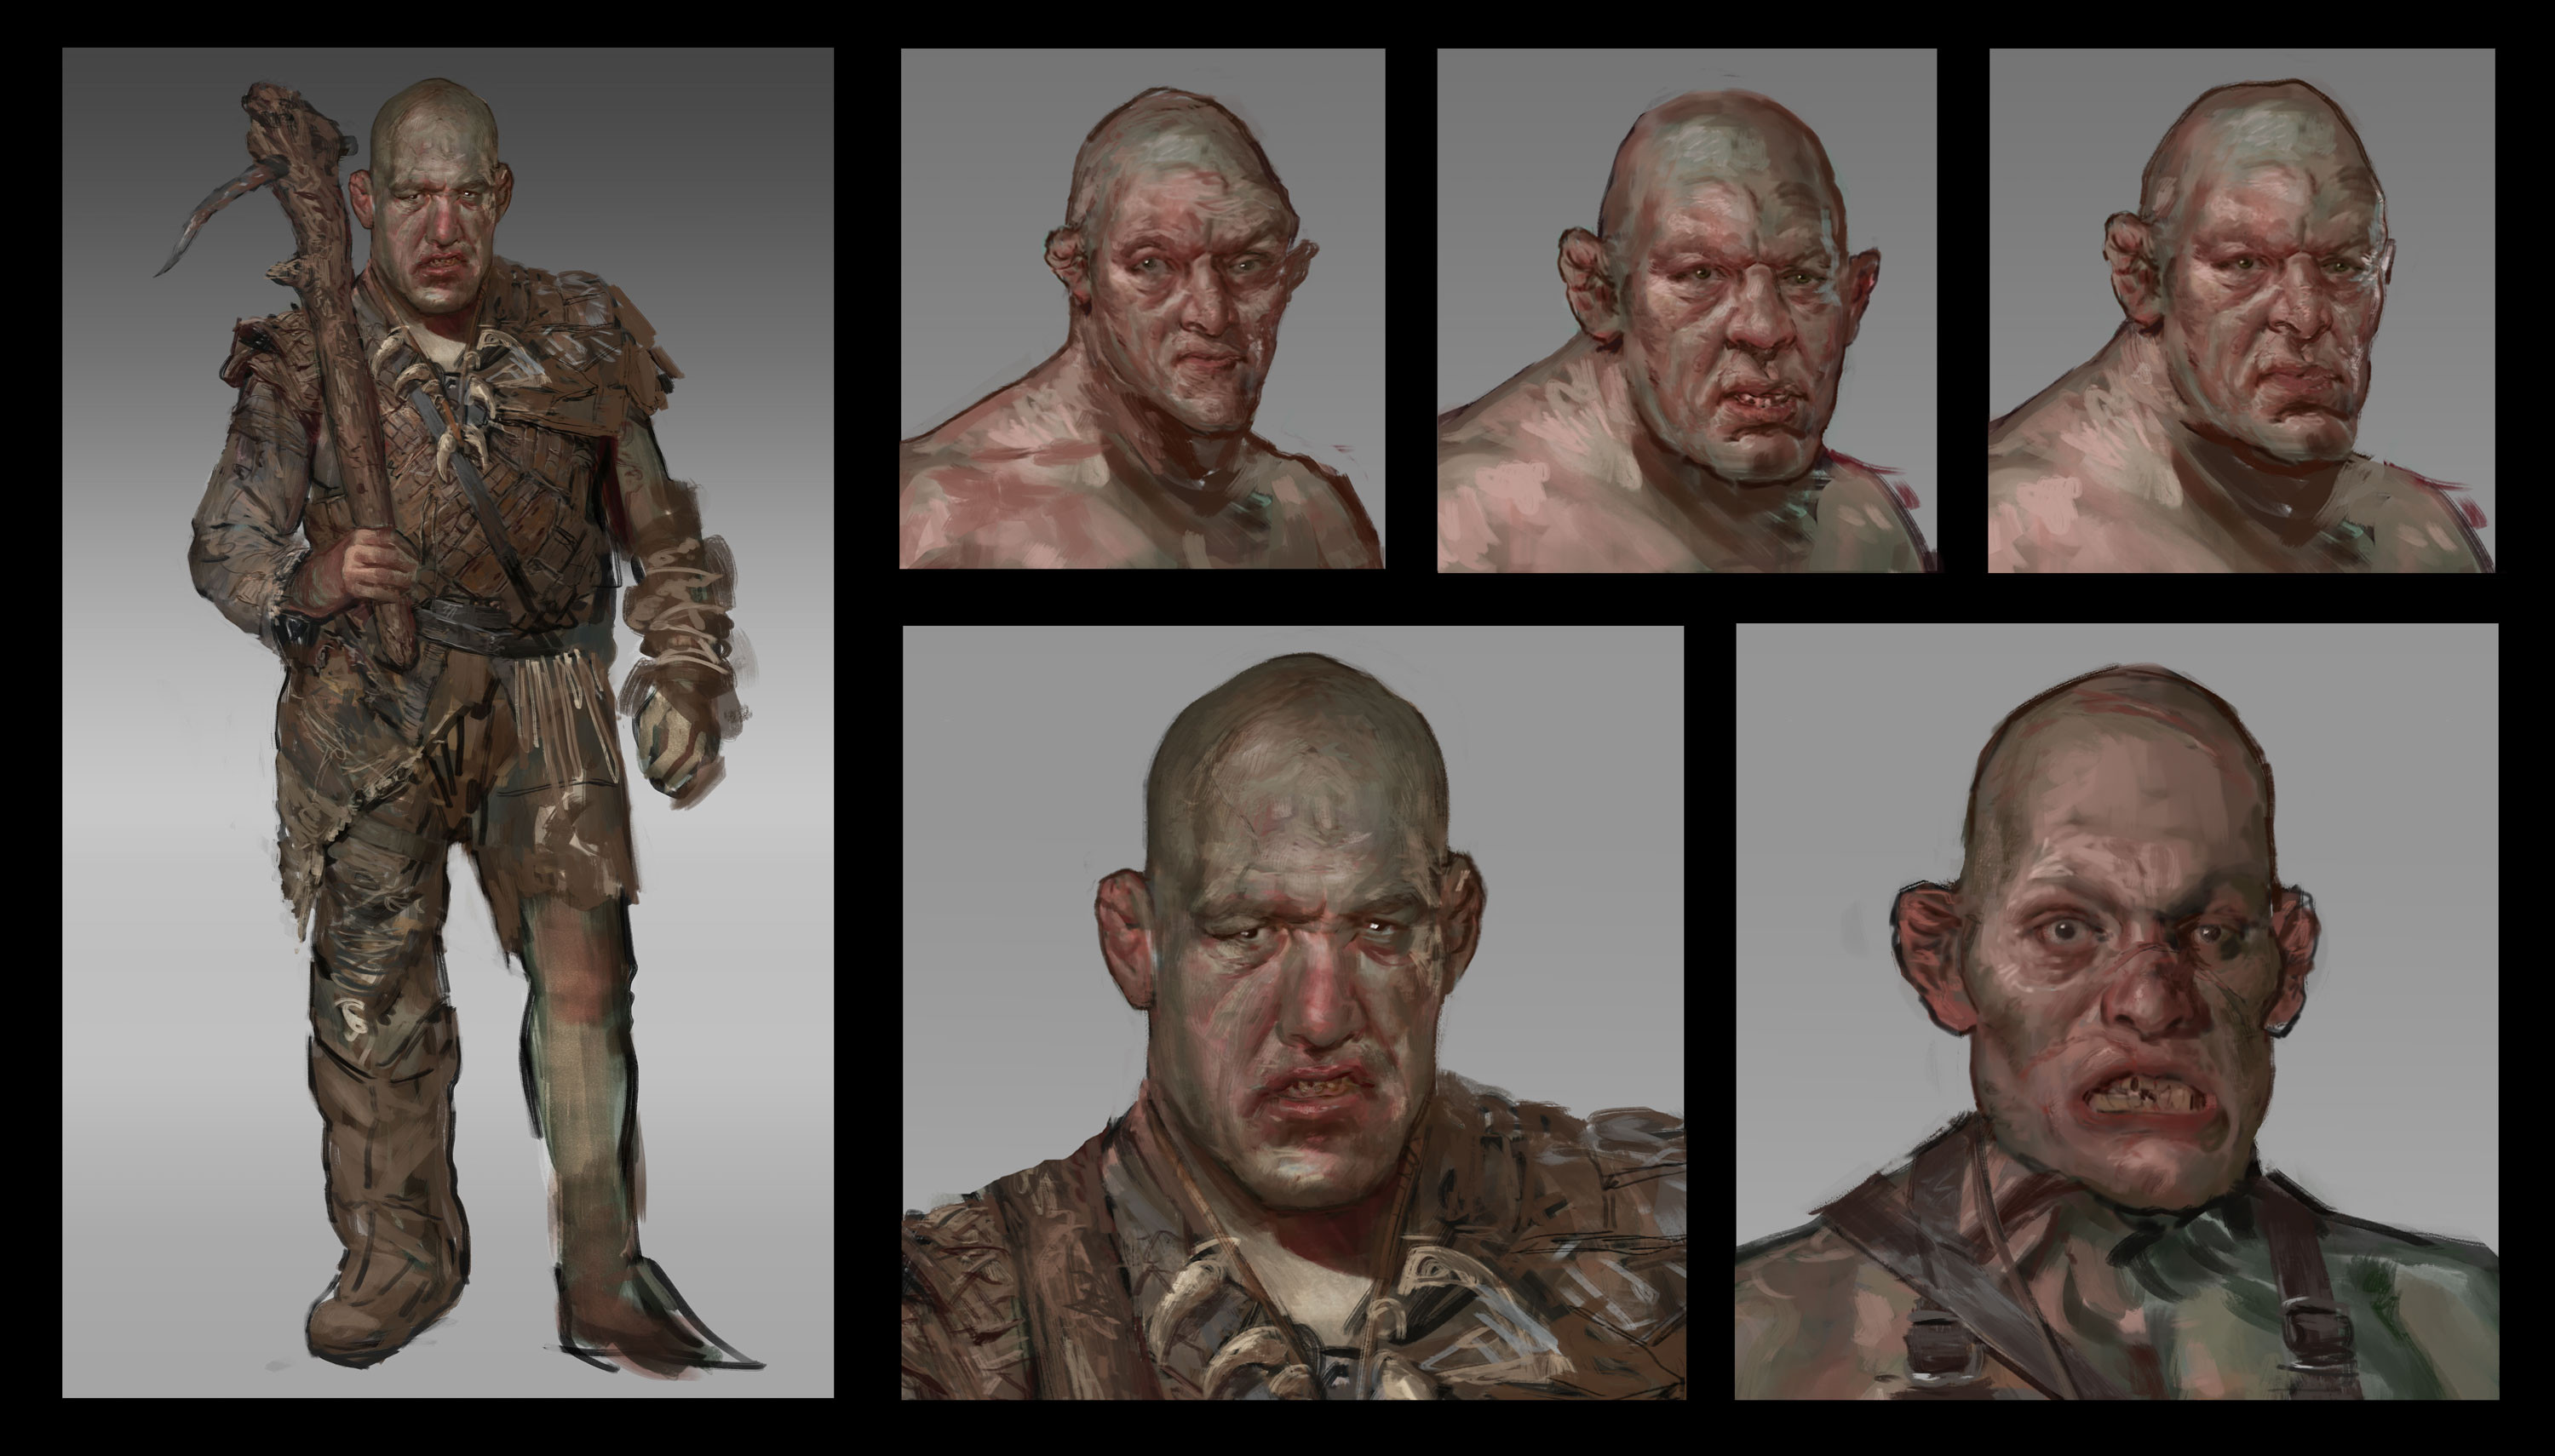 Supermutant mugshots. For the peculiar shape of the head and enlarged features, I referenced the condition Acromegaly. In particular I looked at images of Andre the giant and Maurice Tillet.